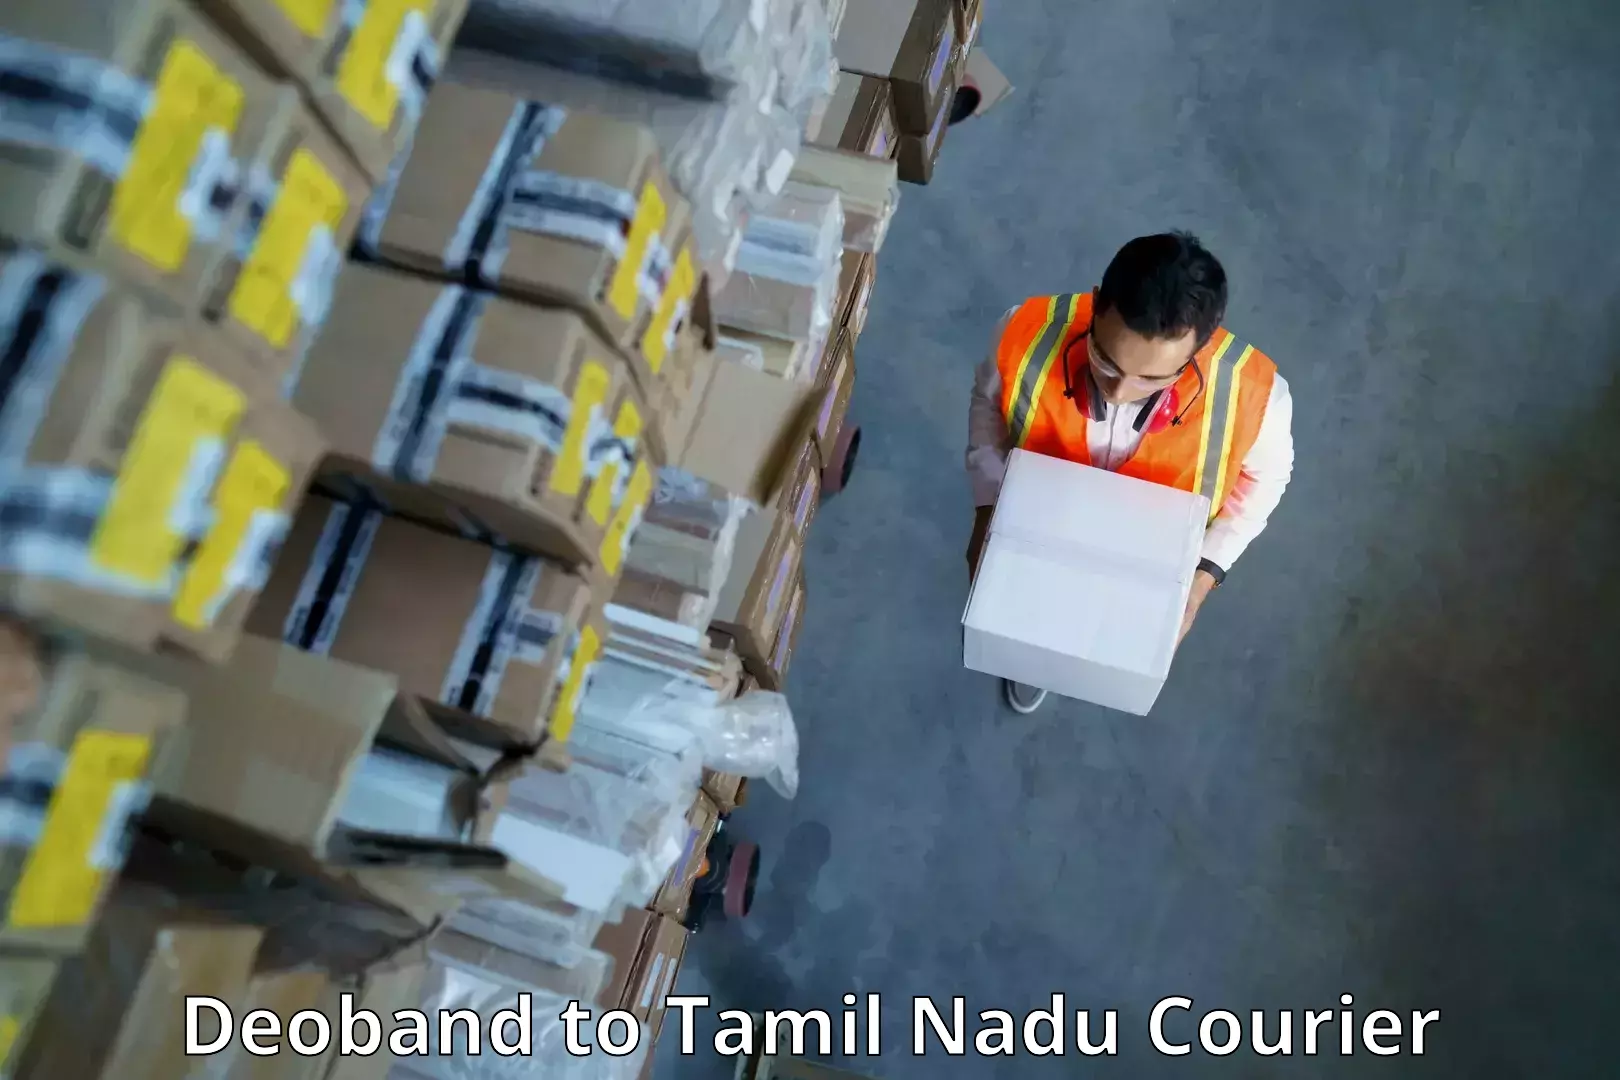 Courier service booking Deoband to Ennore Port Chennai